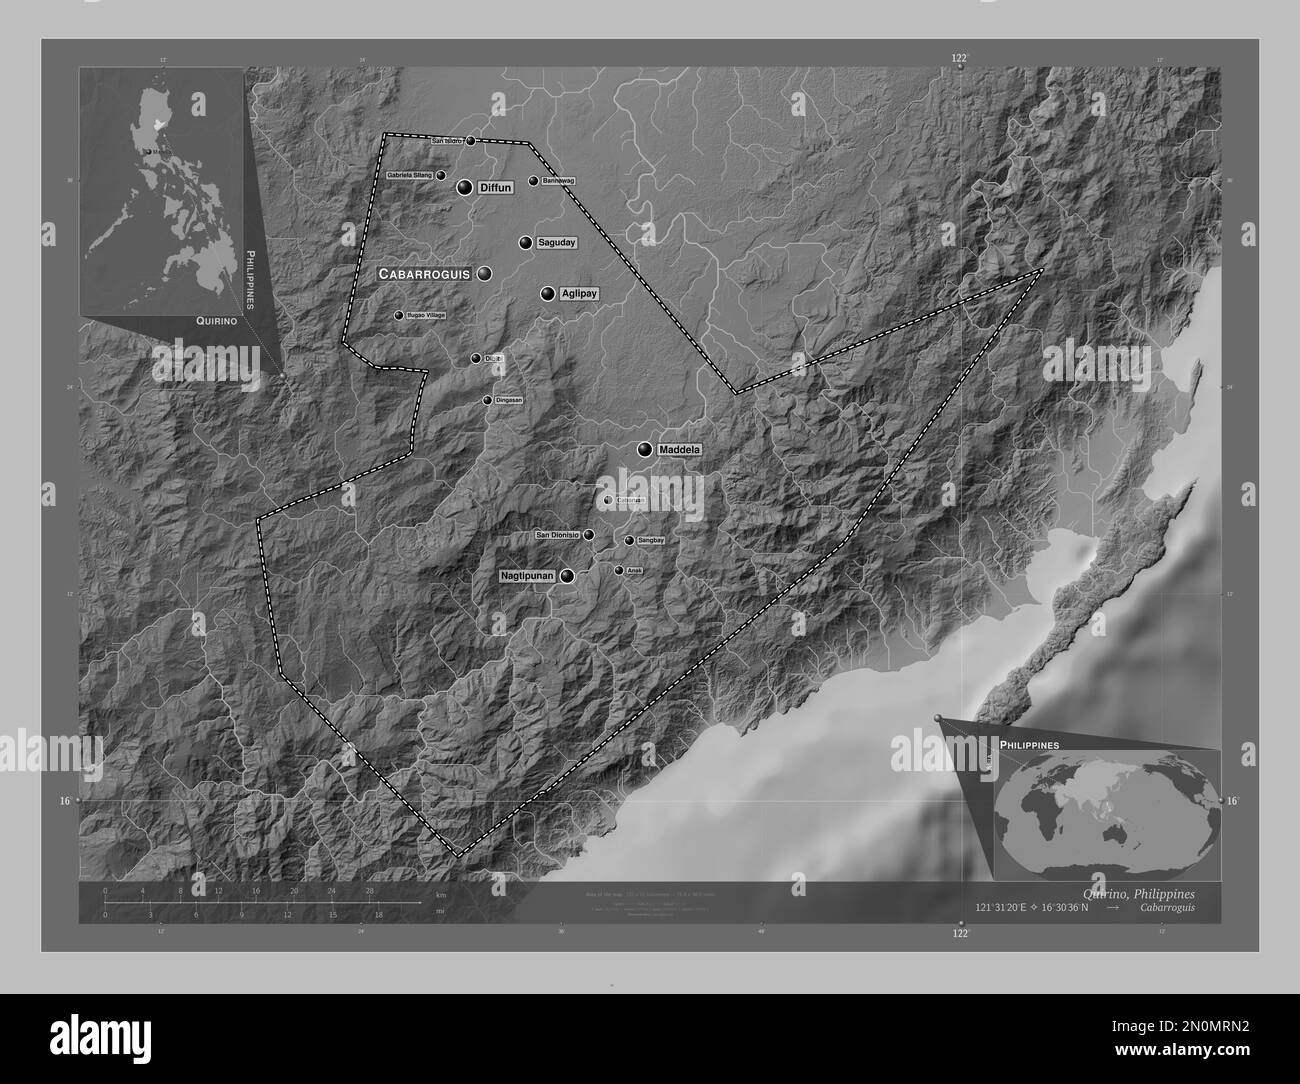 Quirino, province of Philippines. Grayscale elevation map with lakes and rivers. Locations and names of major cities of the region. Corner auxiliary l Stock Photo